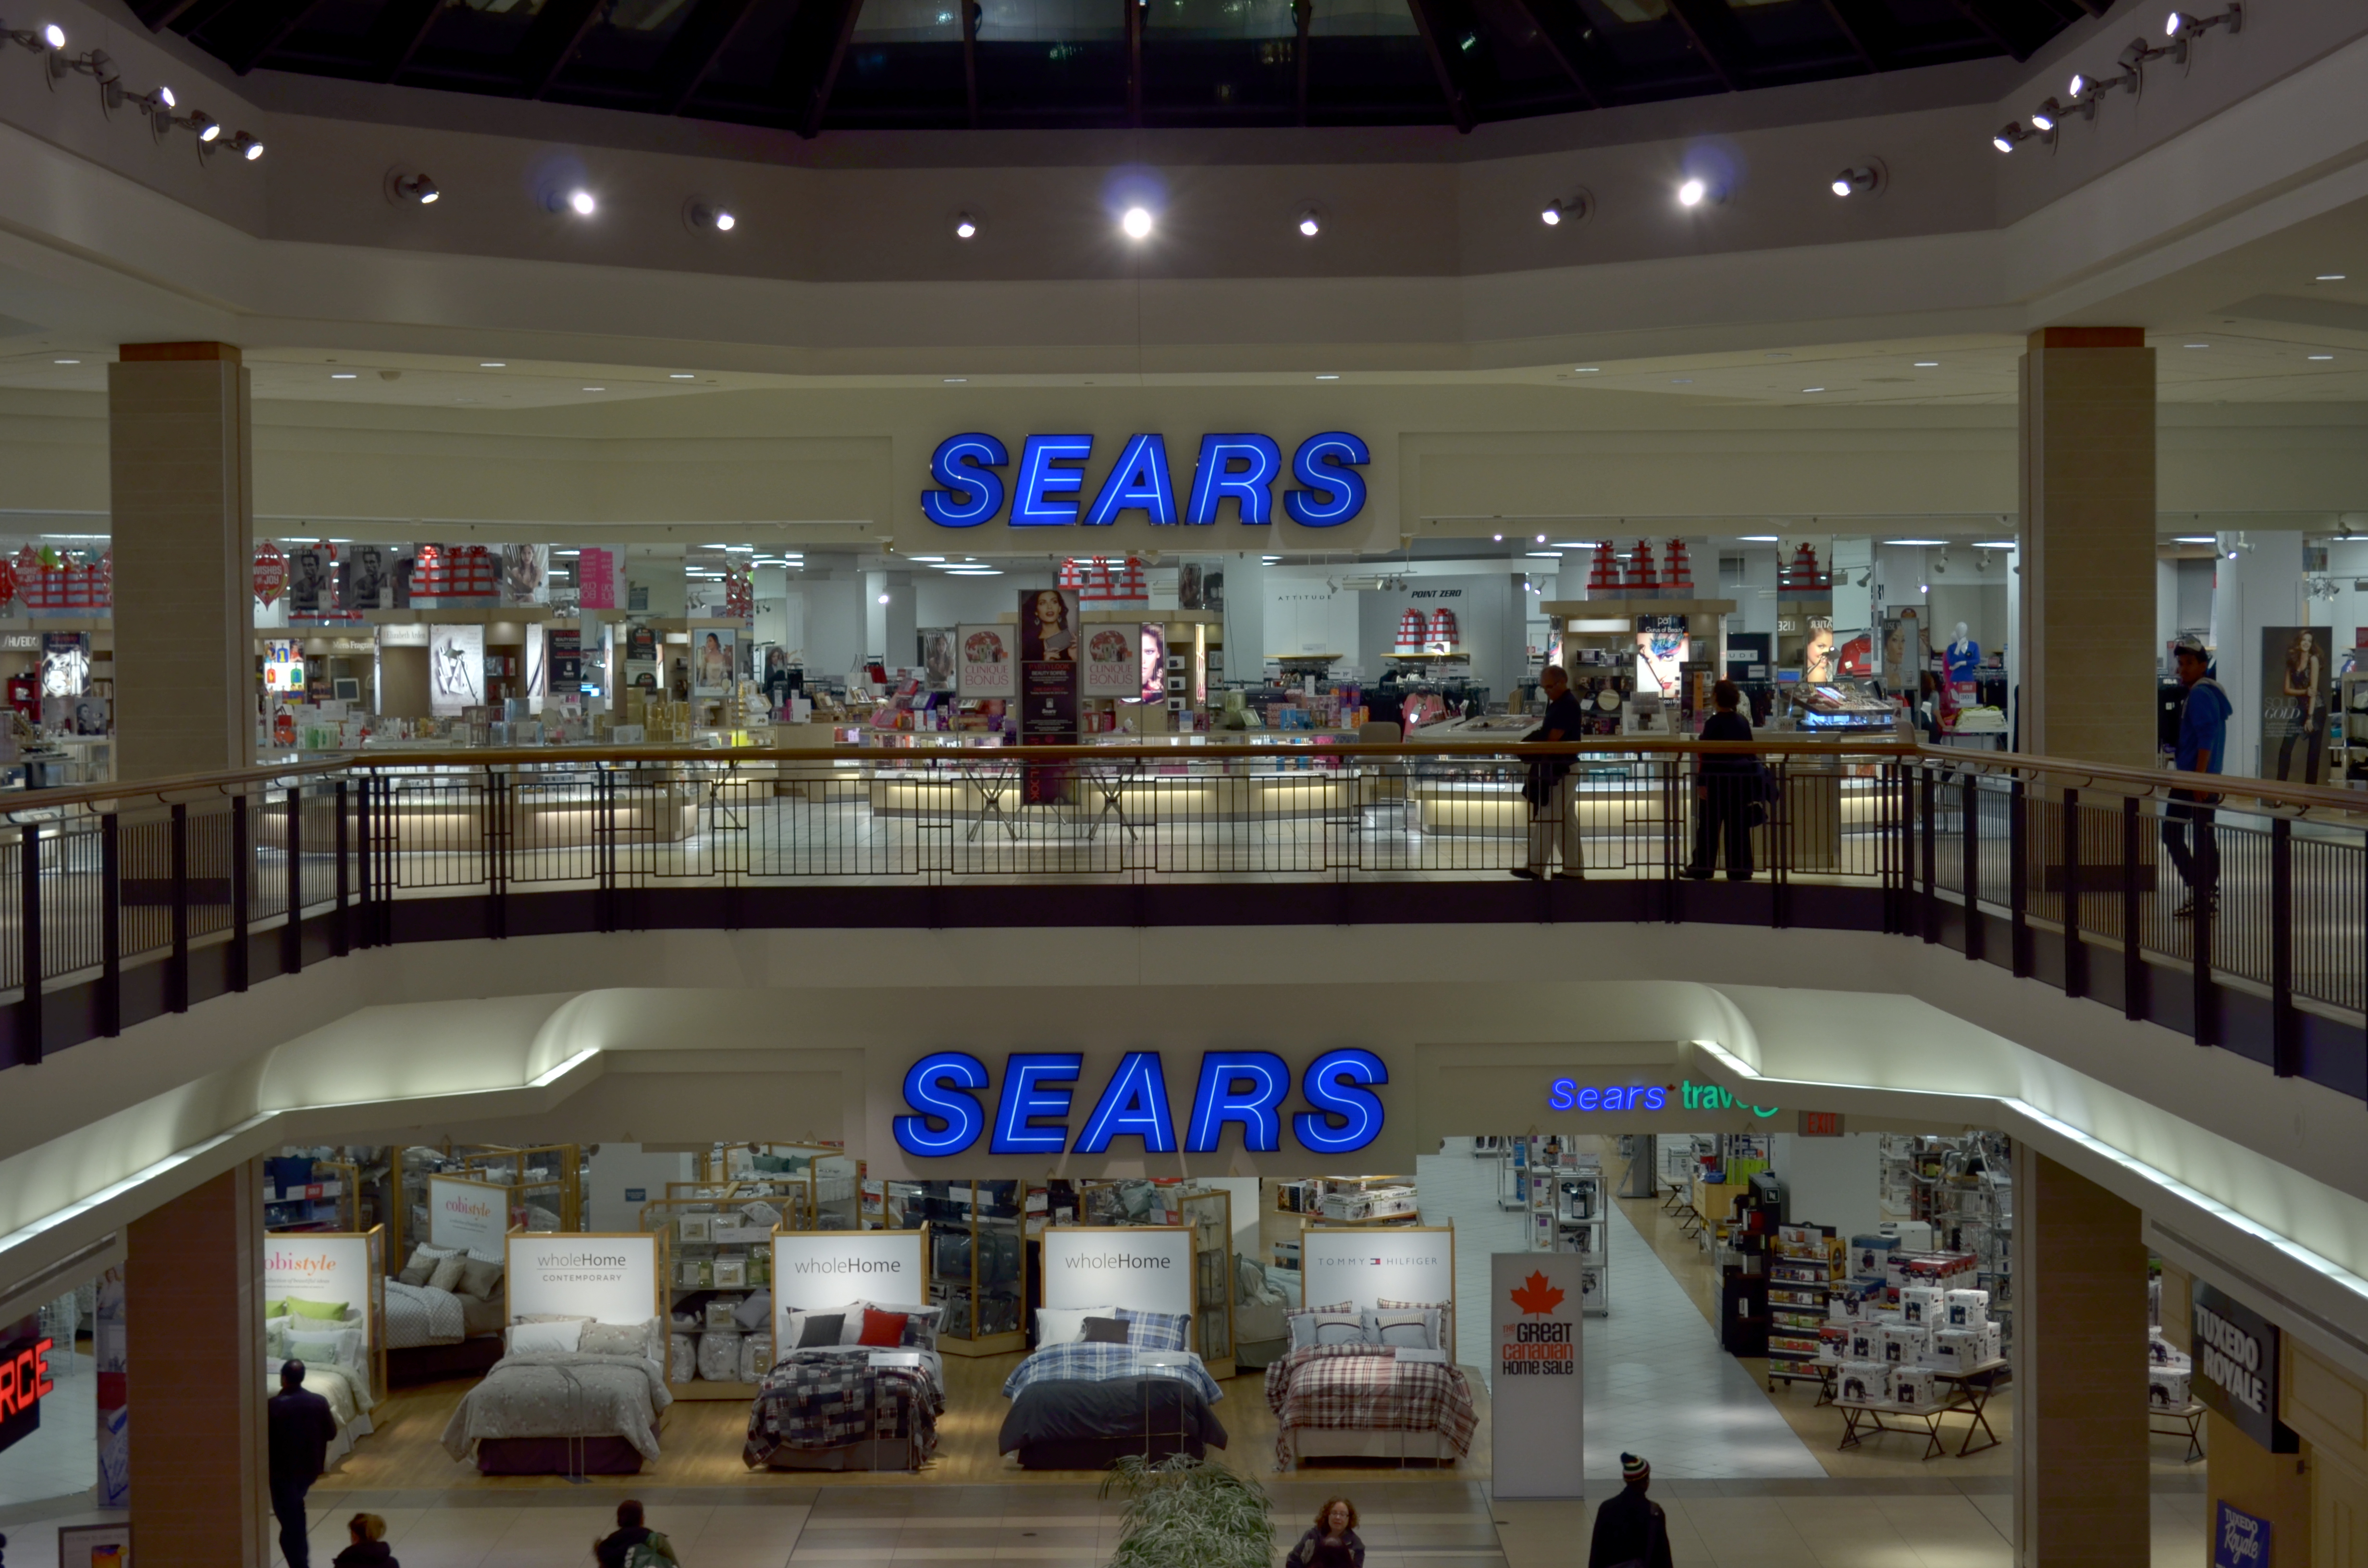 Sears Store Image Crazy Gallery